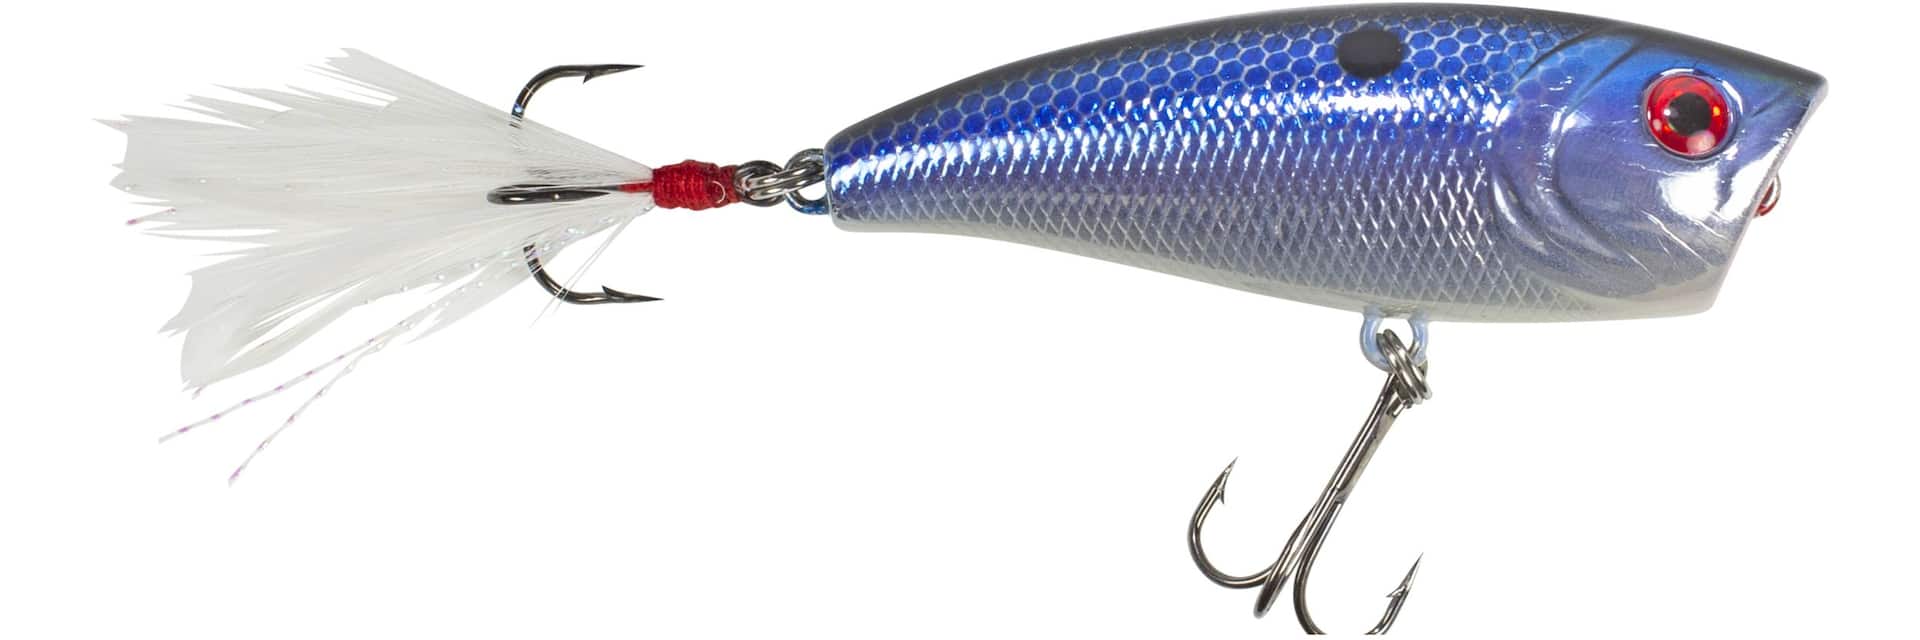 Cheap Fishing Lures, Buy Directly from China Suppliers:50% off